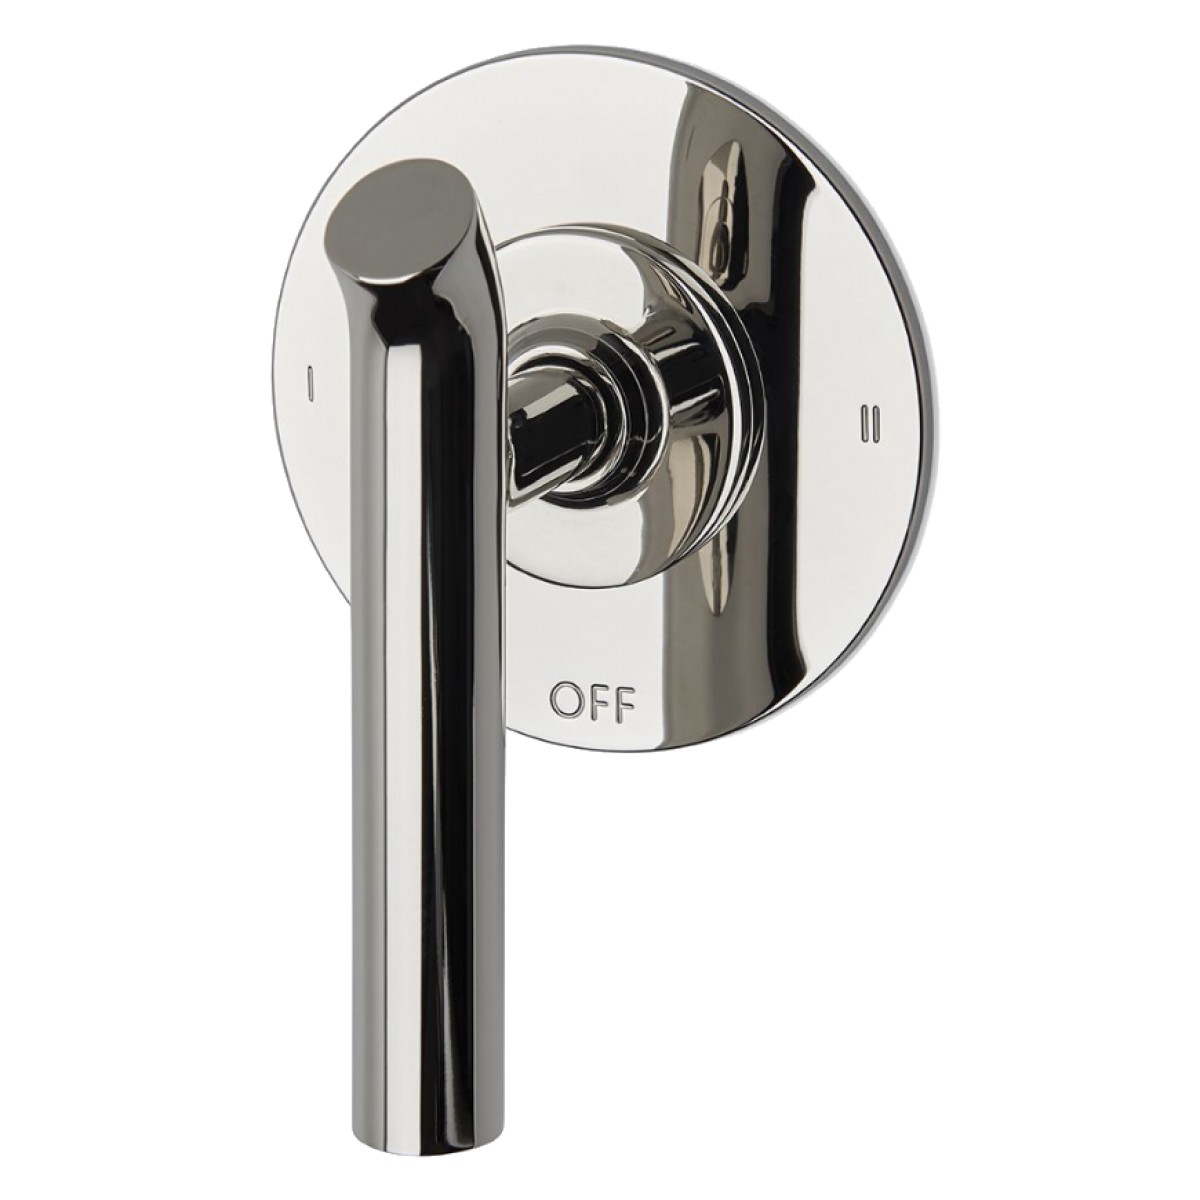 Bond Solo Series Two Way Thermostatic Diverter Trim with Roman Numerals and Lever Handle